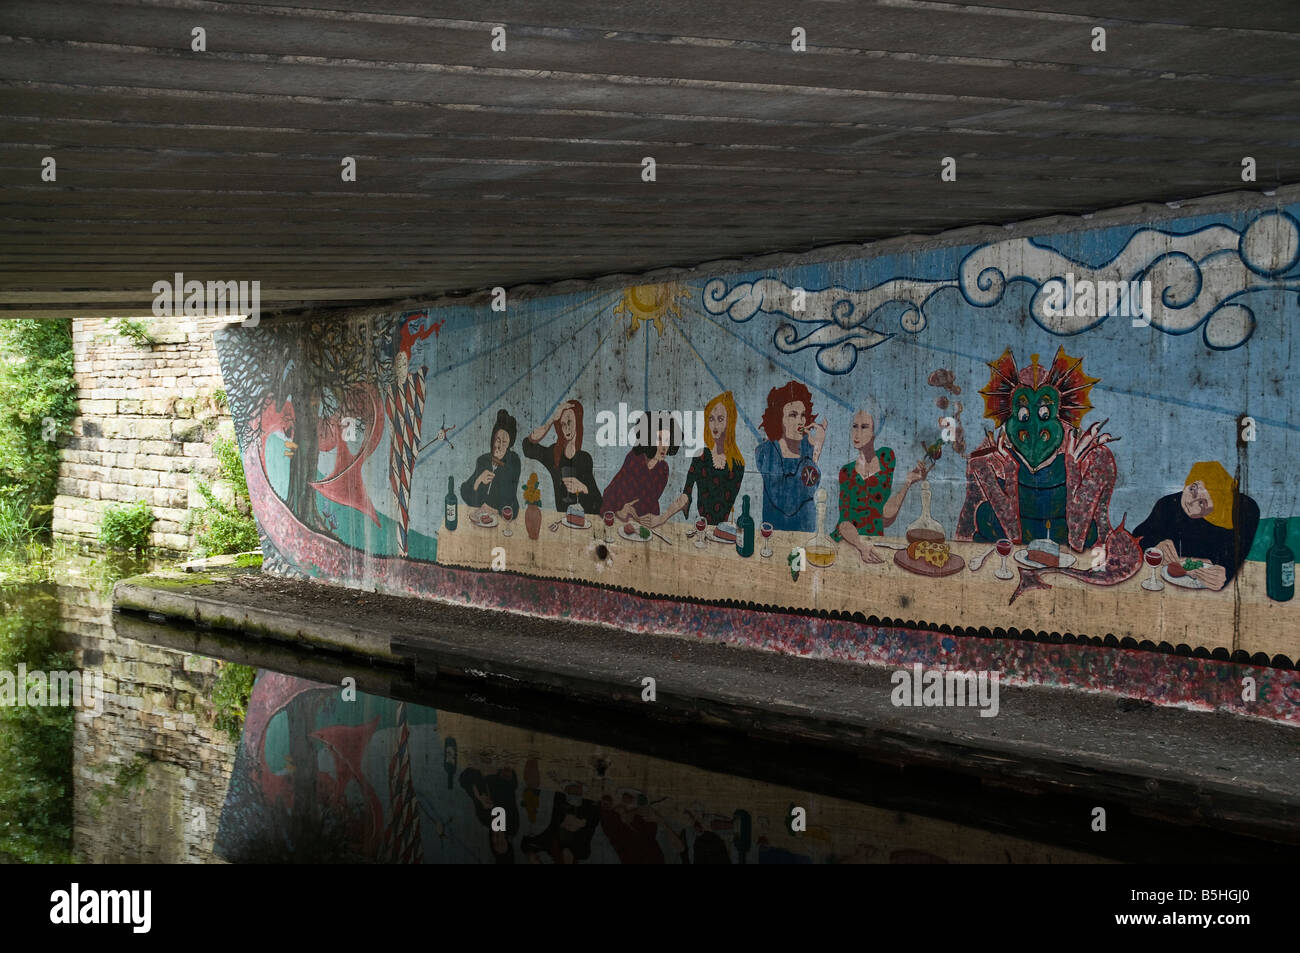 dh Leeds Liverpool Canal SALTAIRE WEST YORKSHIRE UK Graffiti painting in canal underpass wall art mural urban artist drawing Stock Photo